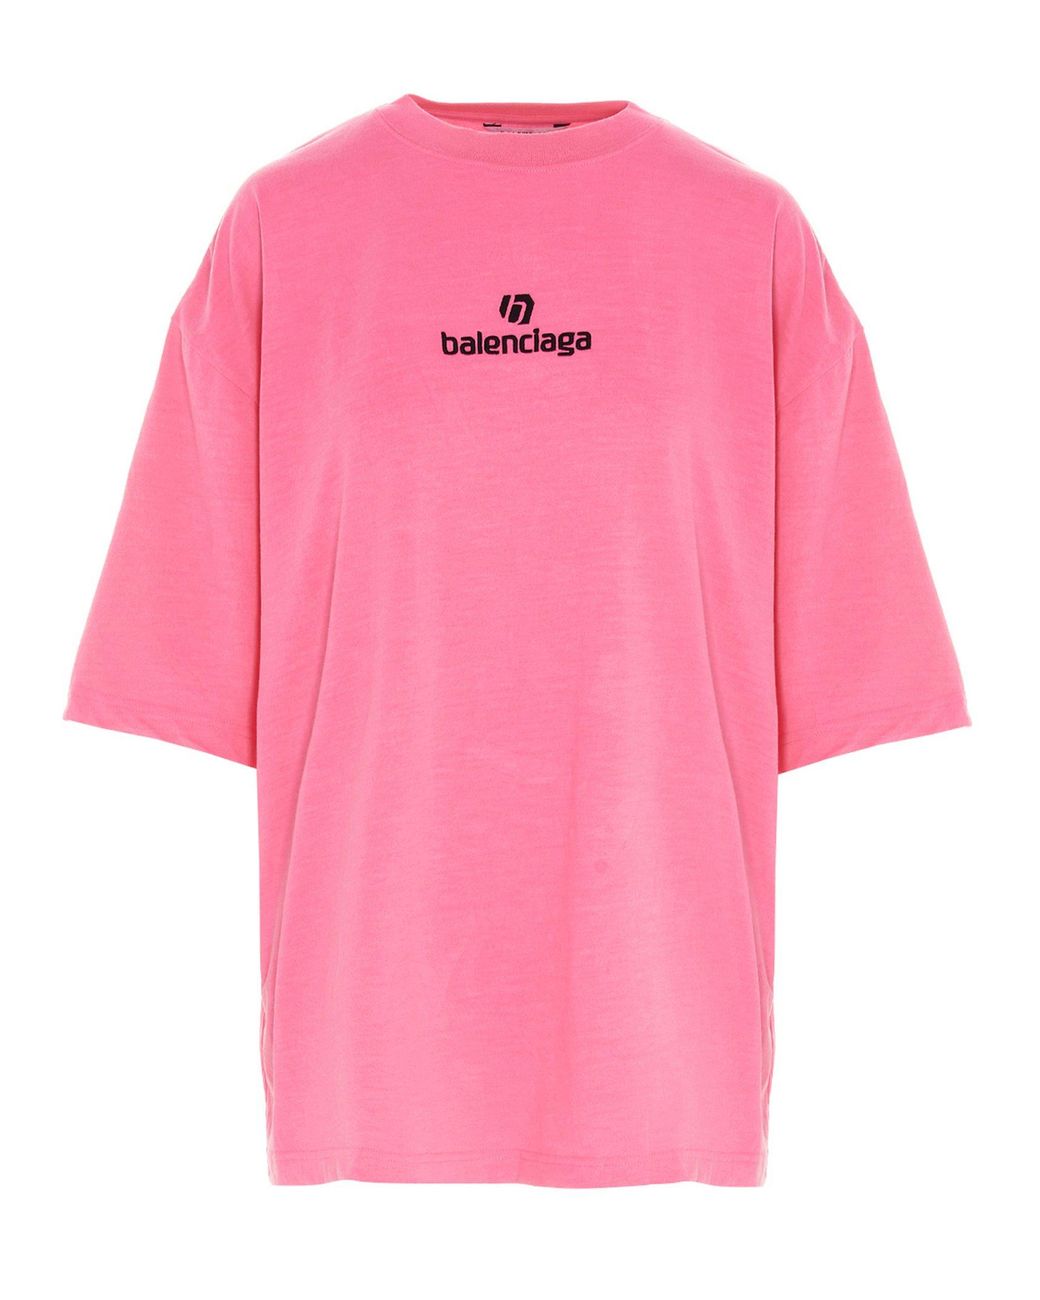 Balenciaga Synthetic Logo Print Oversized T-shirt in Pink - Save 33% - Lyst